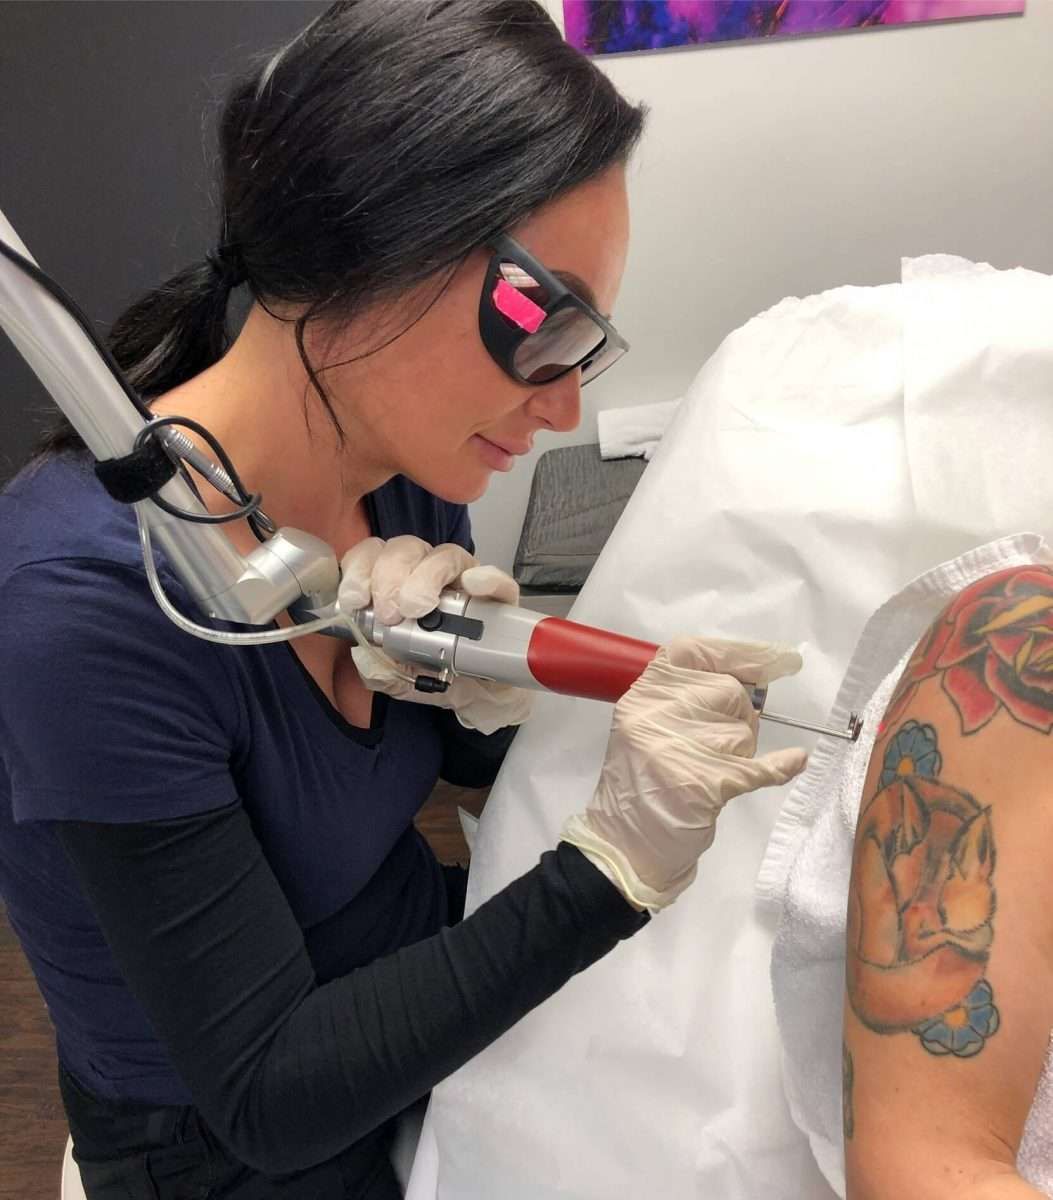 The Laser Tattoo Removal Business